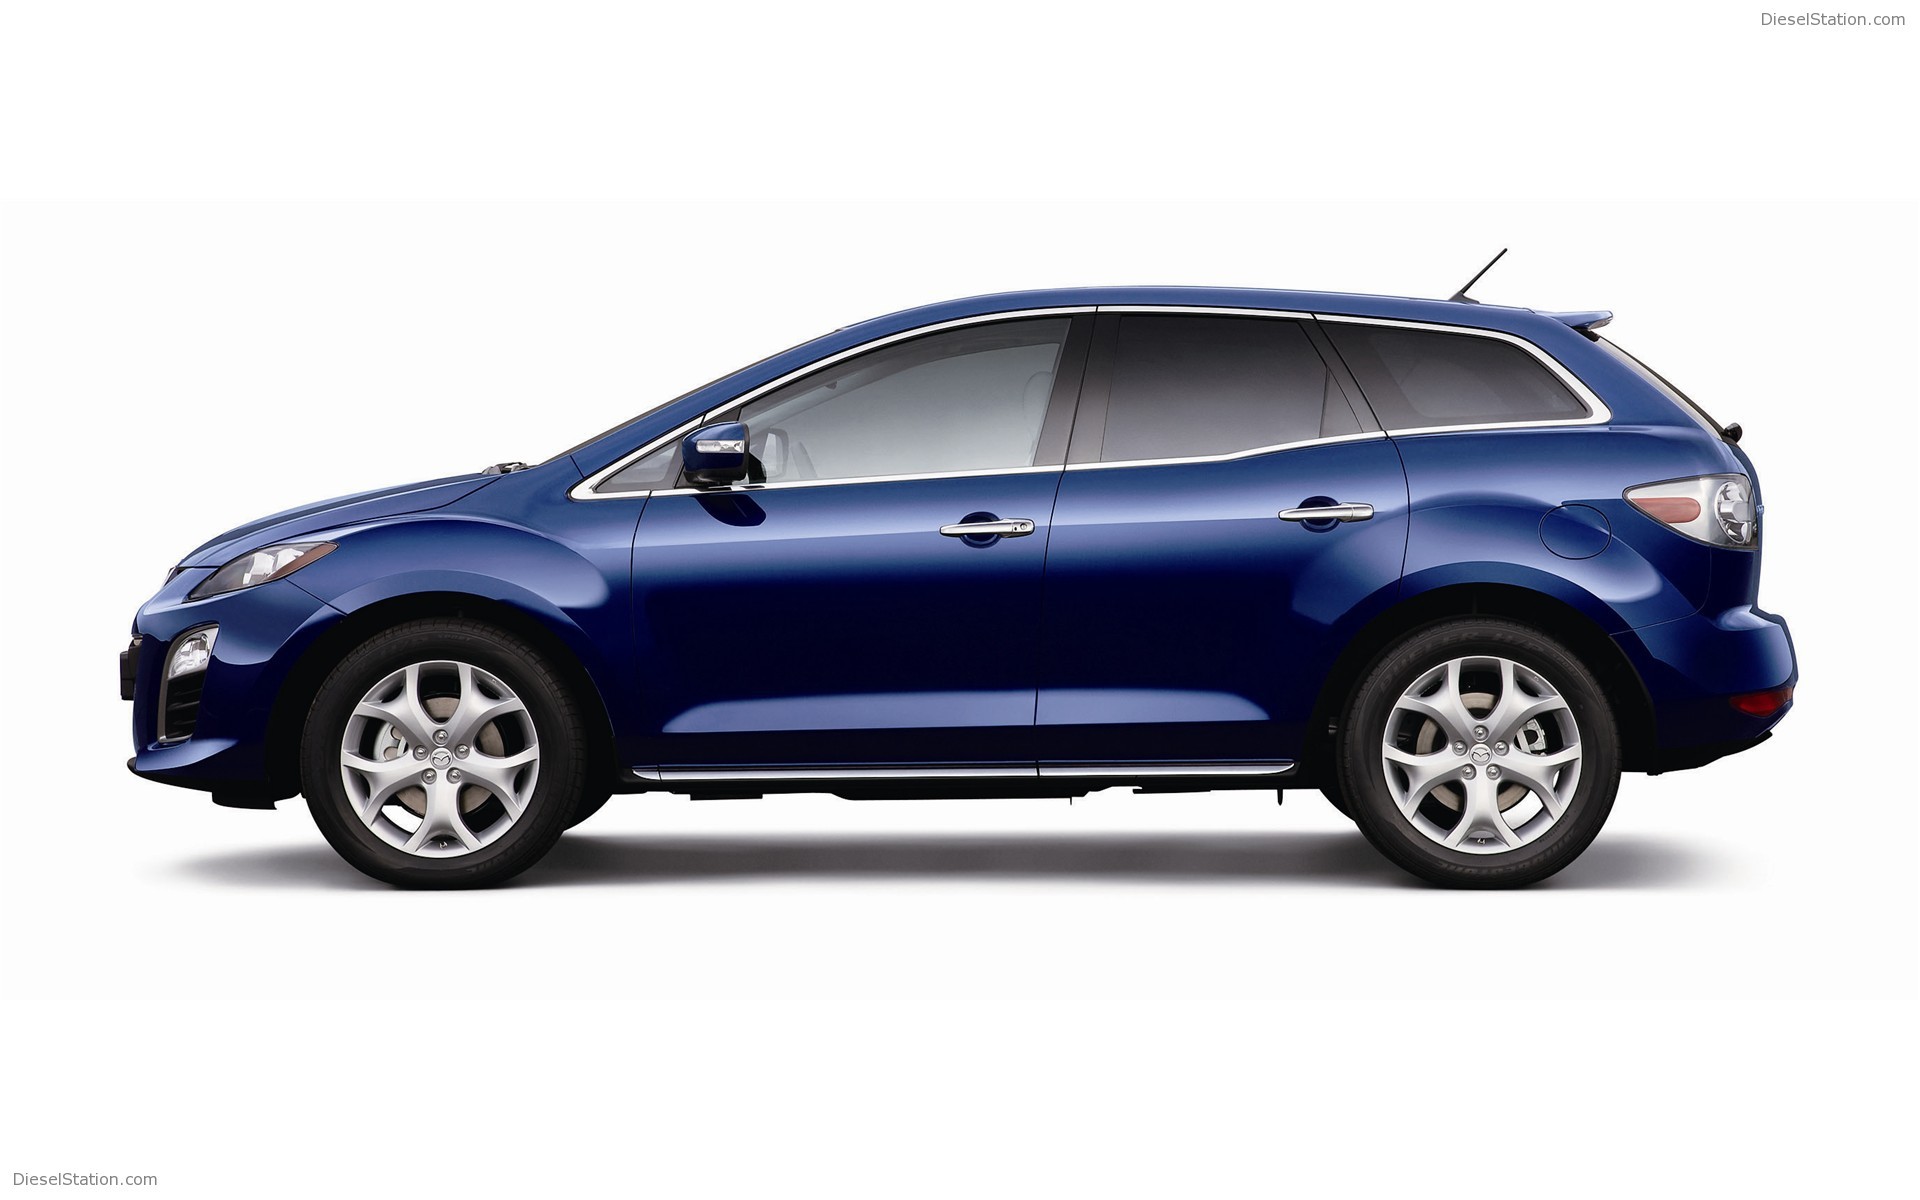 Mazda CX7 2014 Review, Amazing Pictures and Images